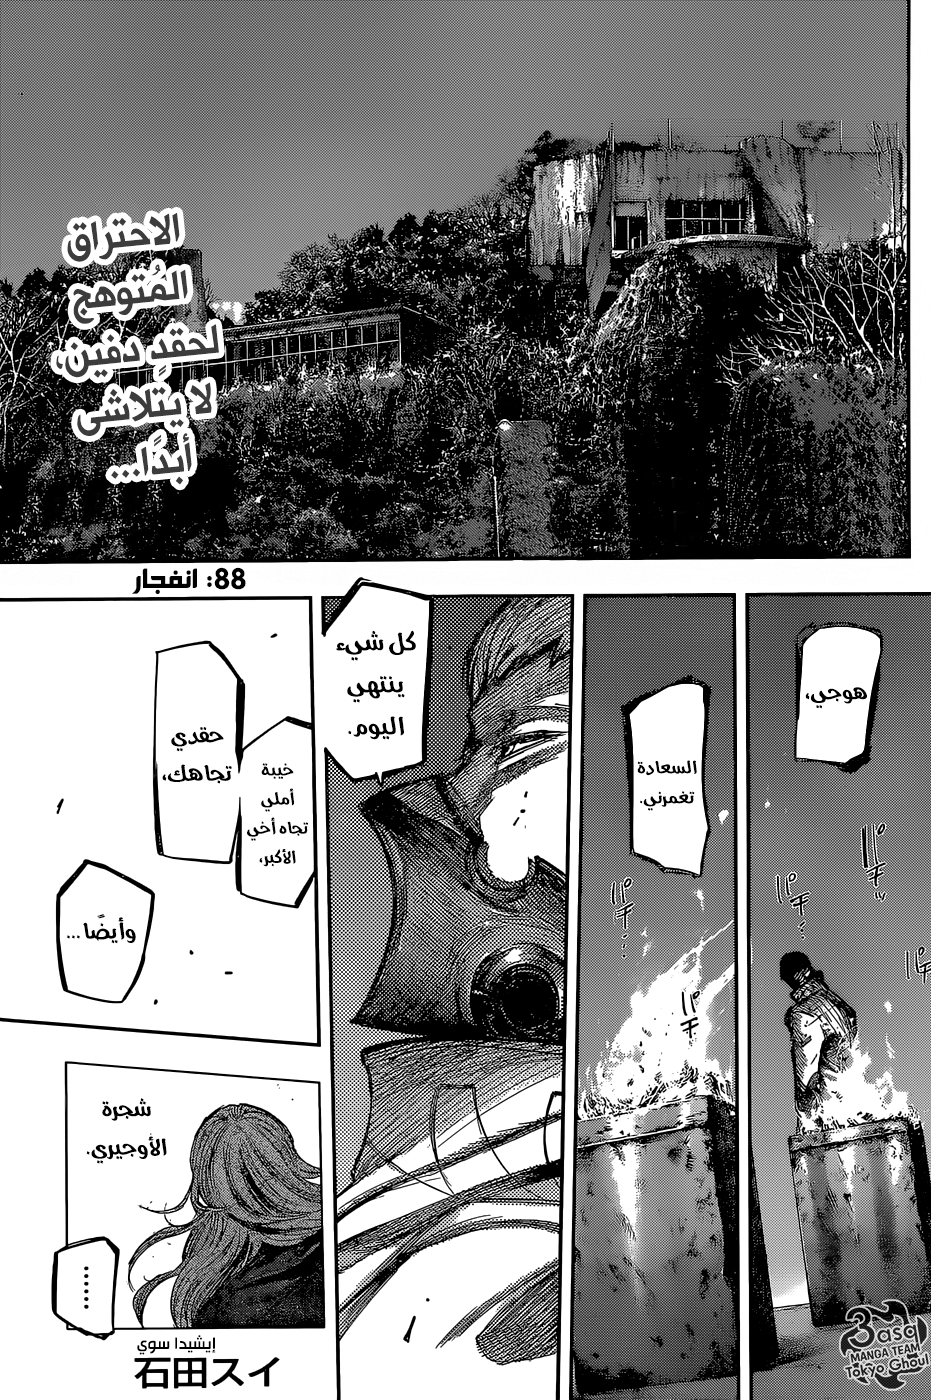 Tokyo Ghoul: Re: Chapter 88 - Page 1